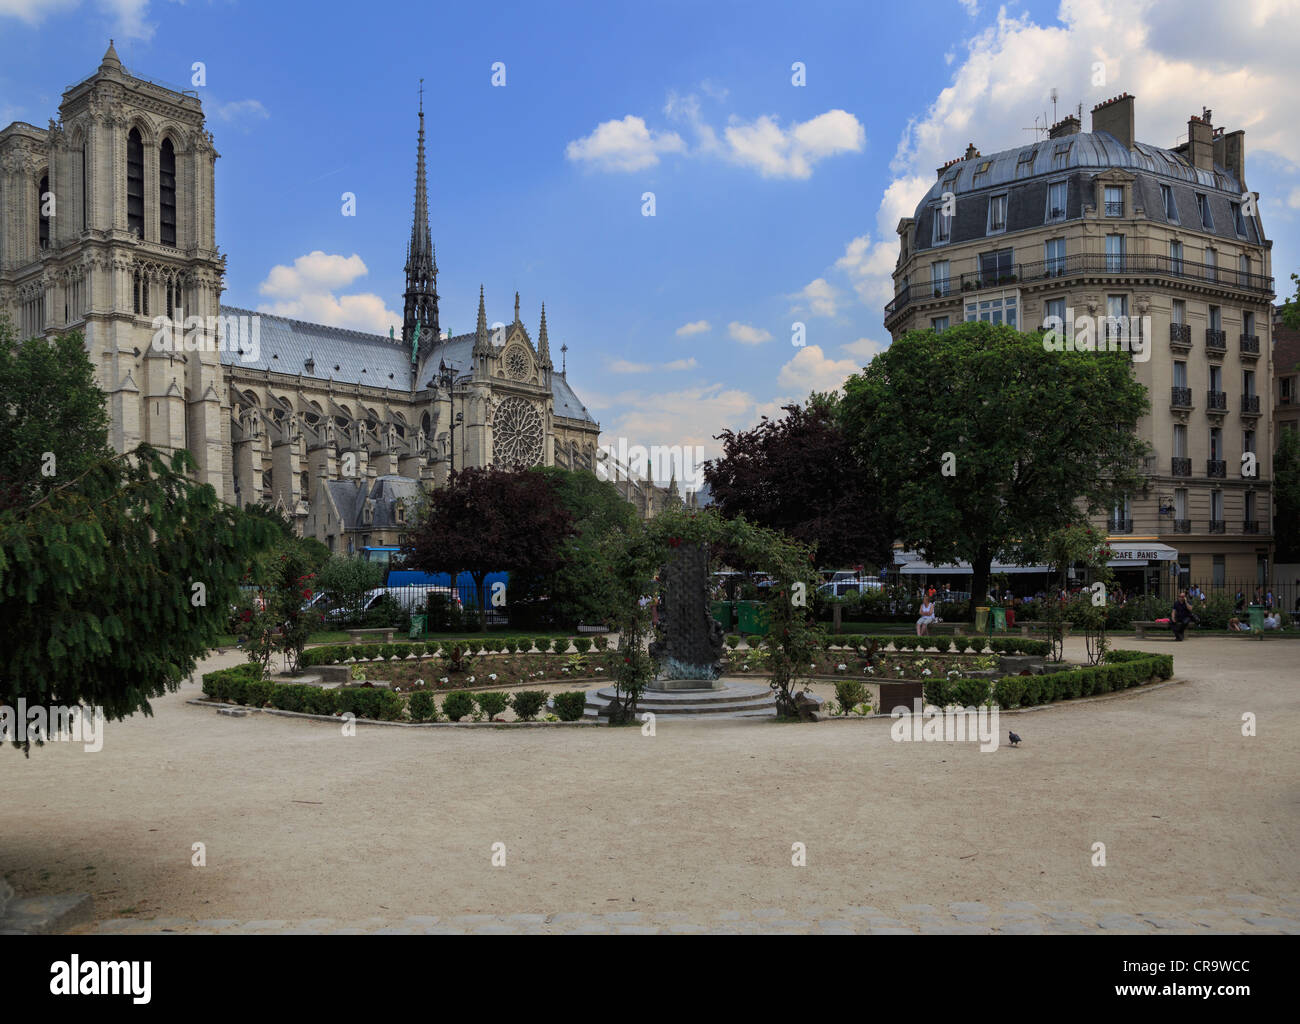 Square Rene Viviani, Paris. The Fontaine Saint Julien Le Pauvre is a modern contrast to the Cathedral of Notre Dame behind. Stock Photo